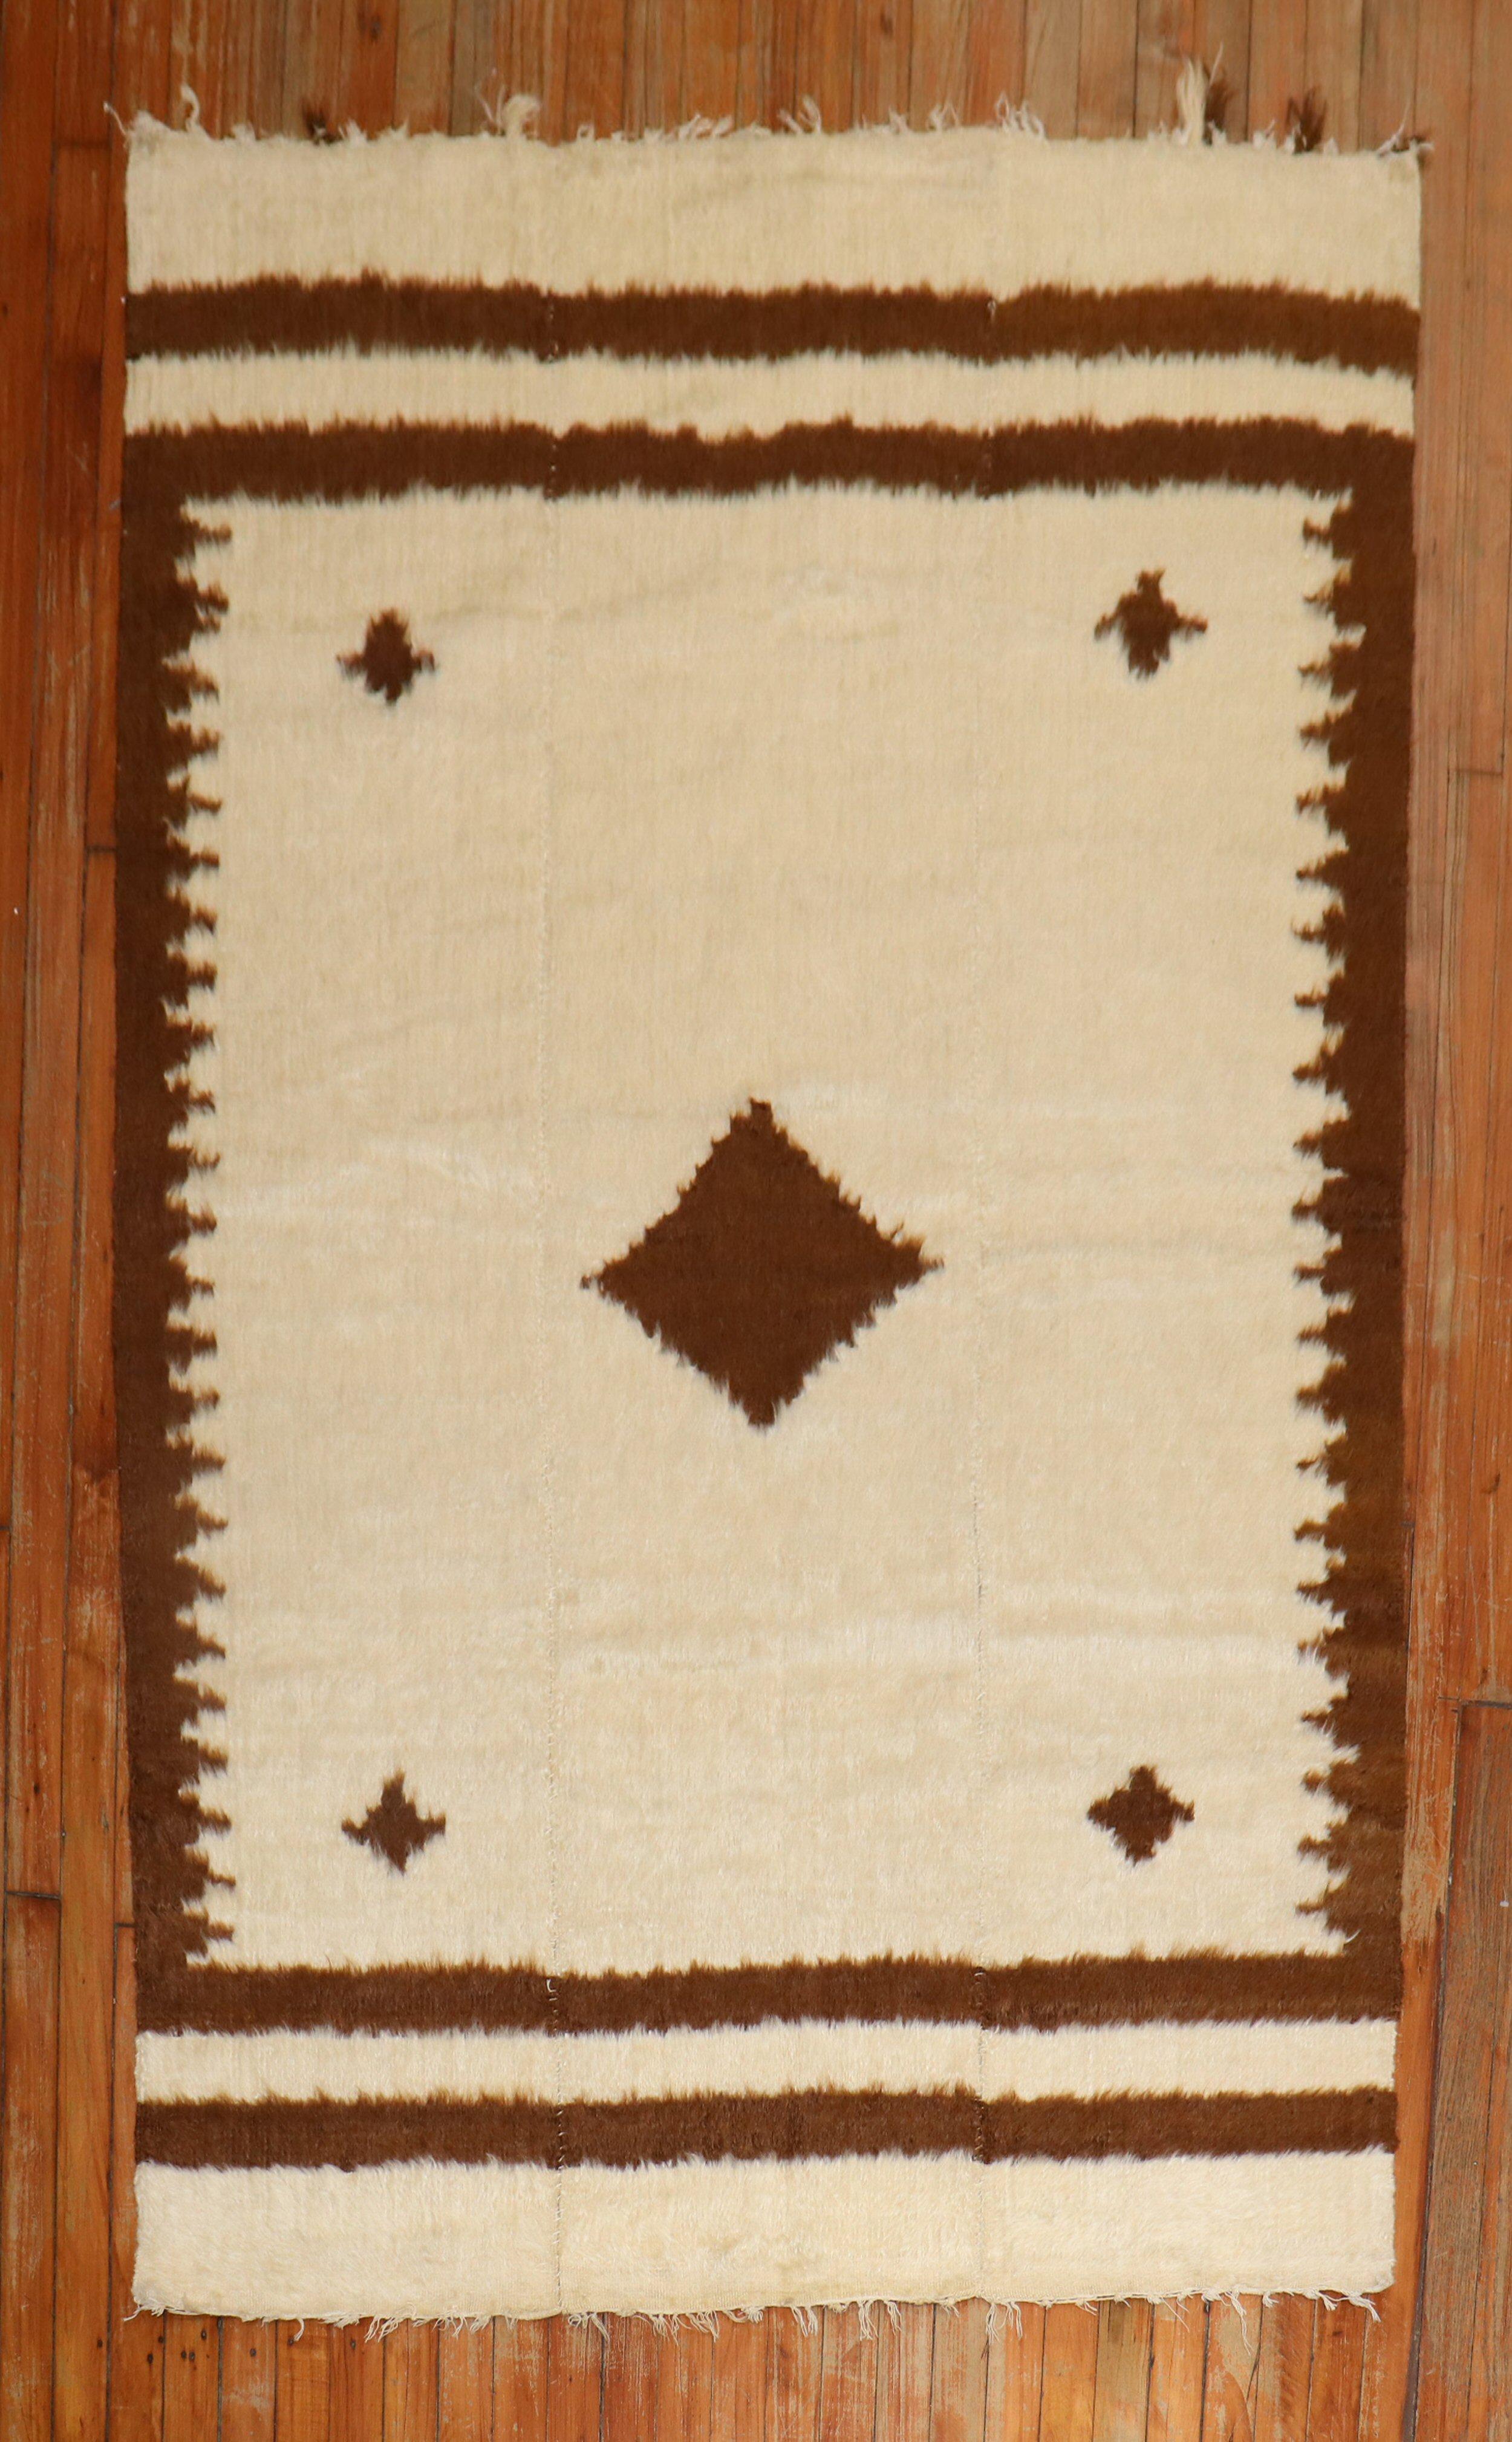 Vintage Angora mohair wool rug in brown and ivory.

Measures: 4'4'' x 6'9''.